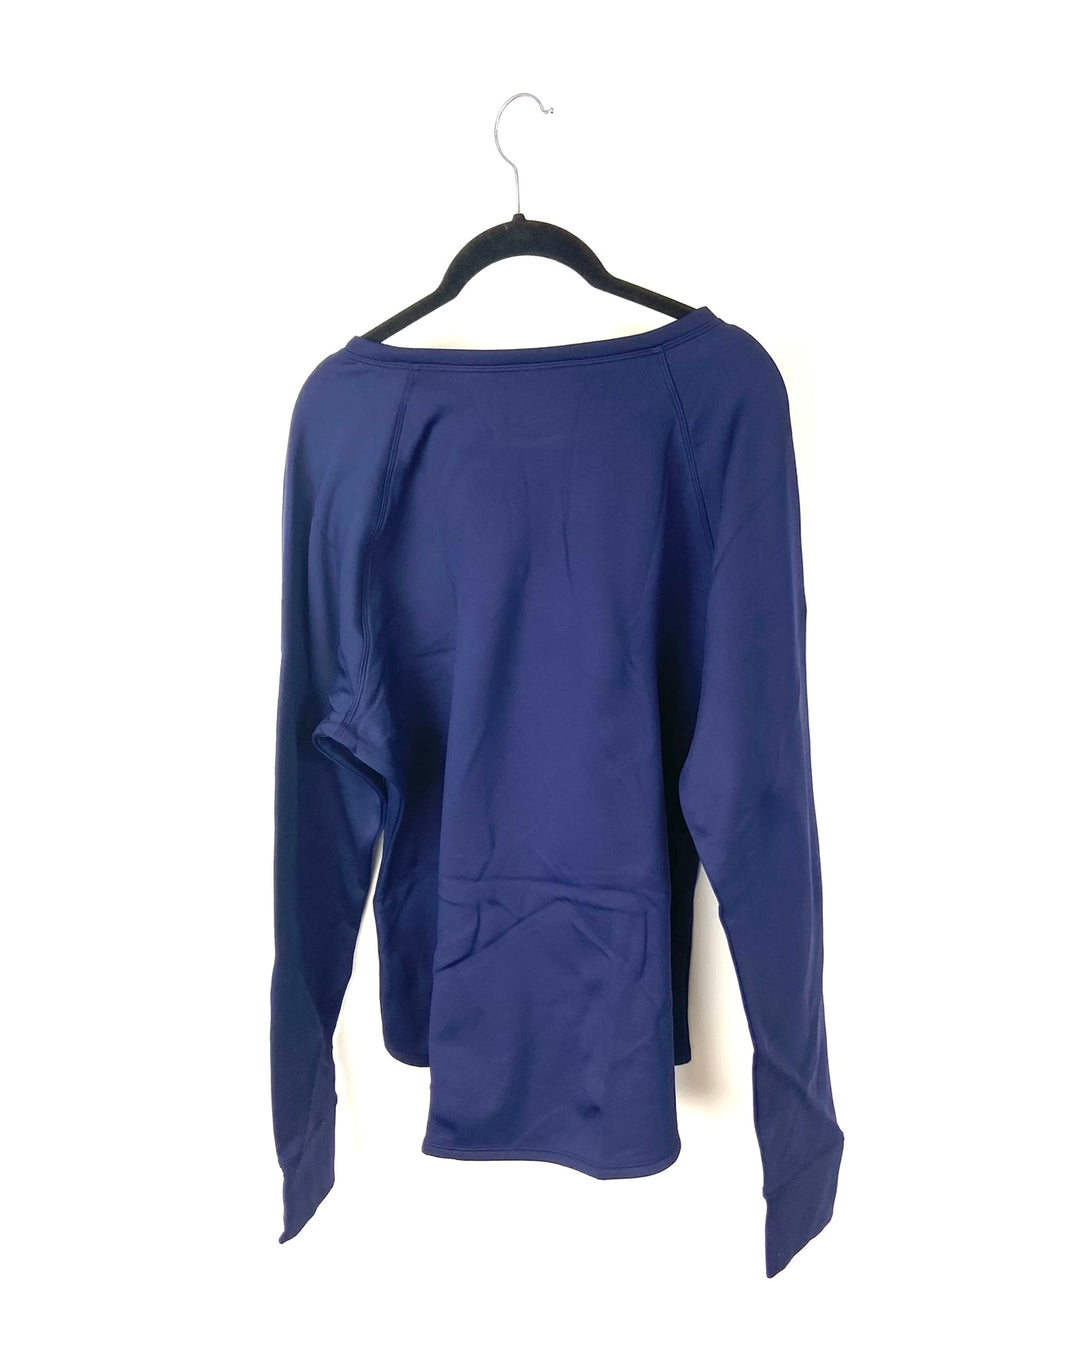 Navy Long Sleeve Top - Small, Medium and Extra Extra Large